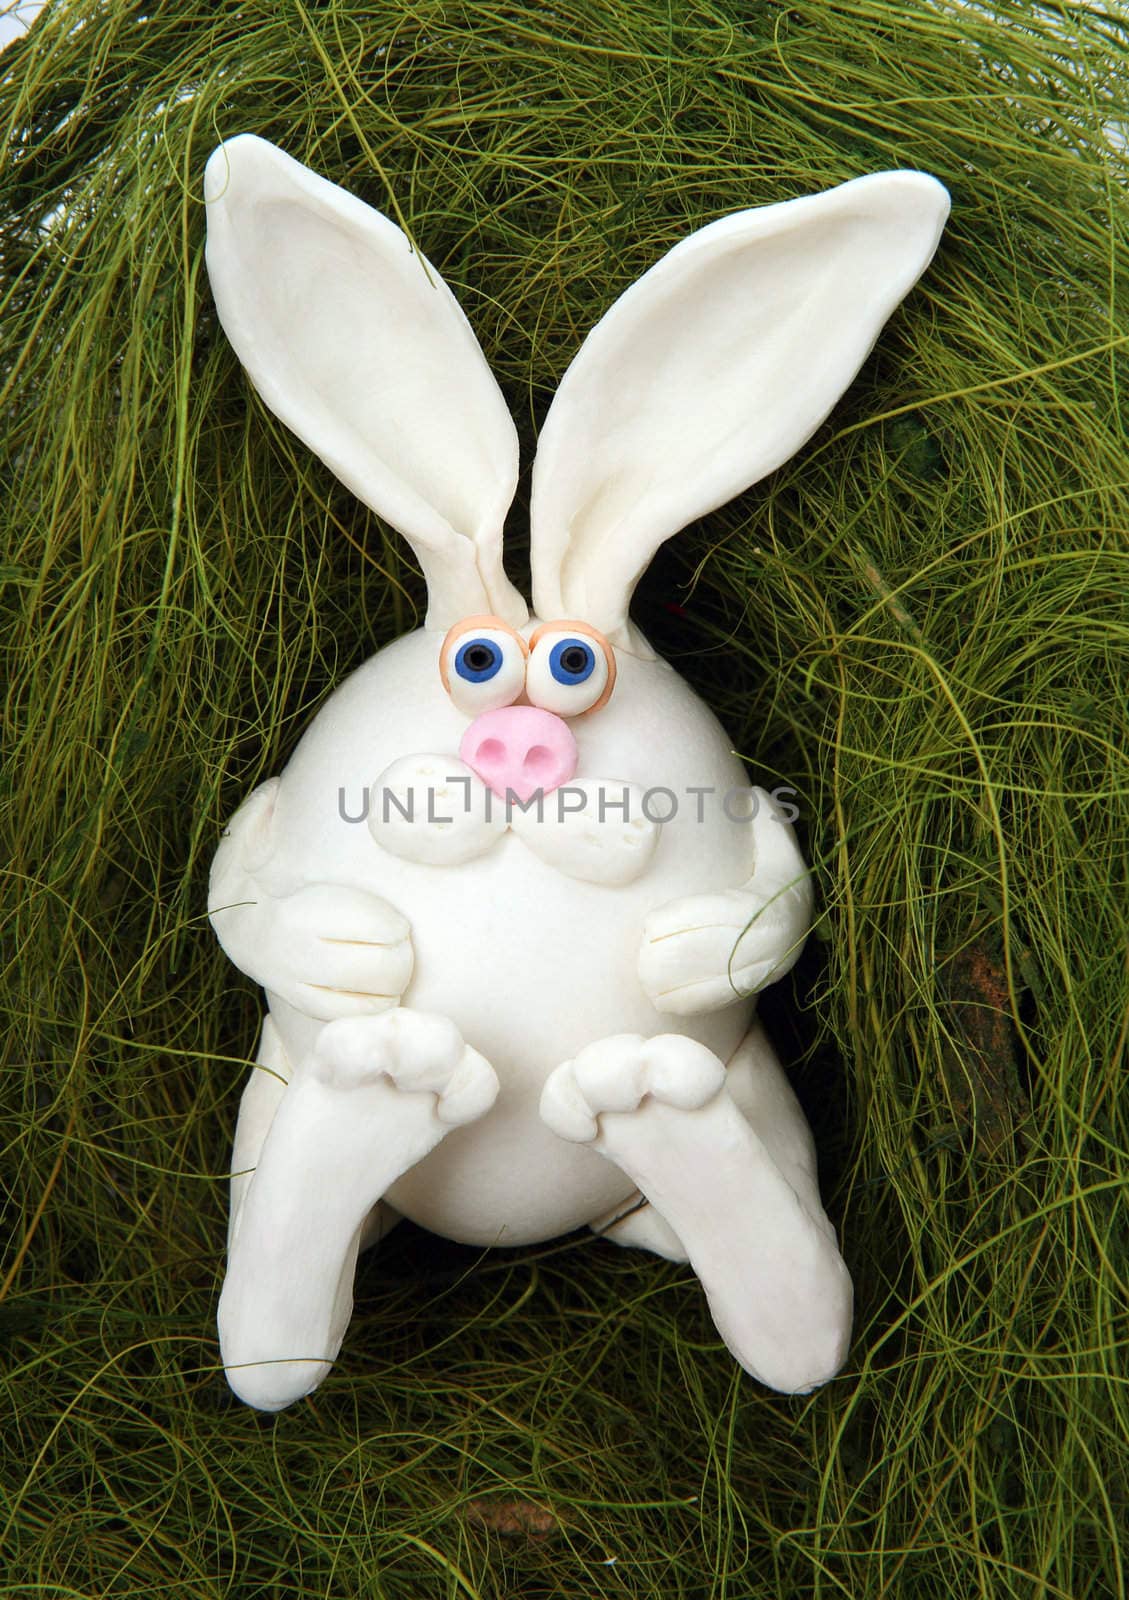 The rabbit made of egg, lays in a nest from a grass
